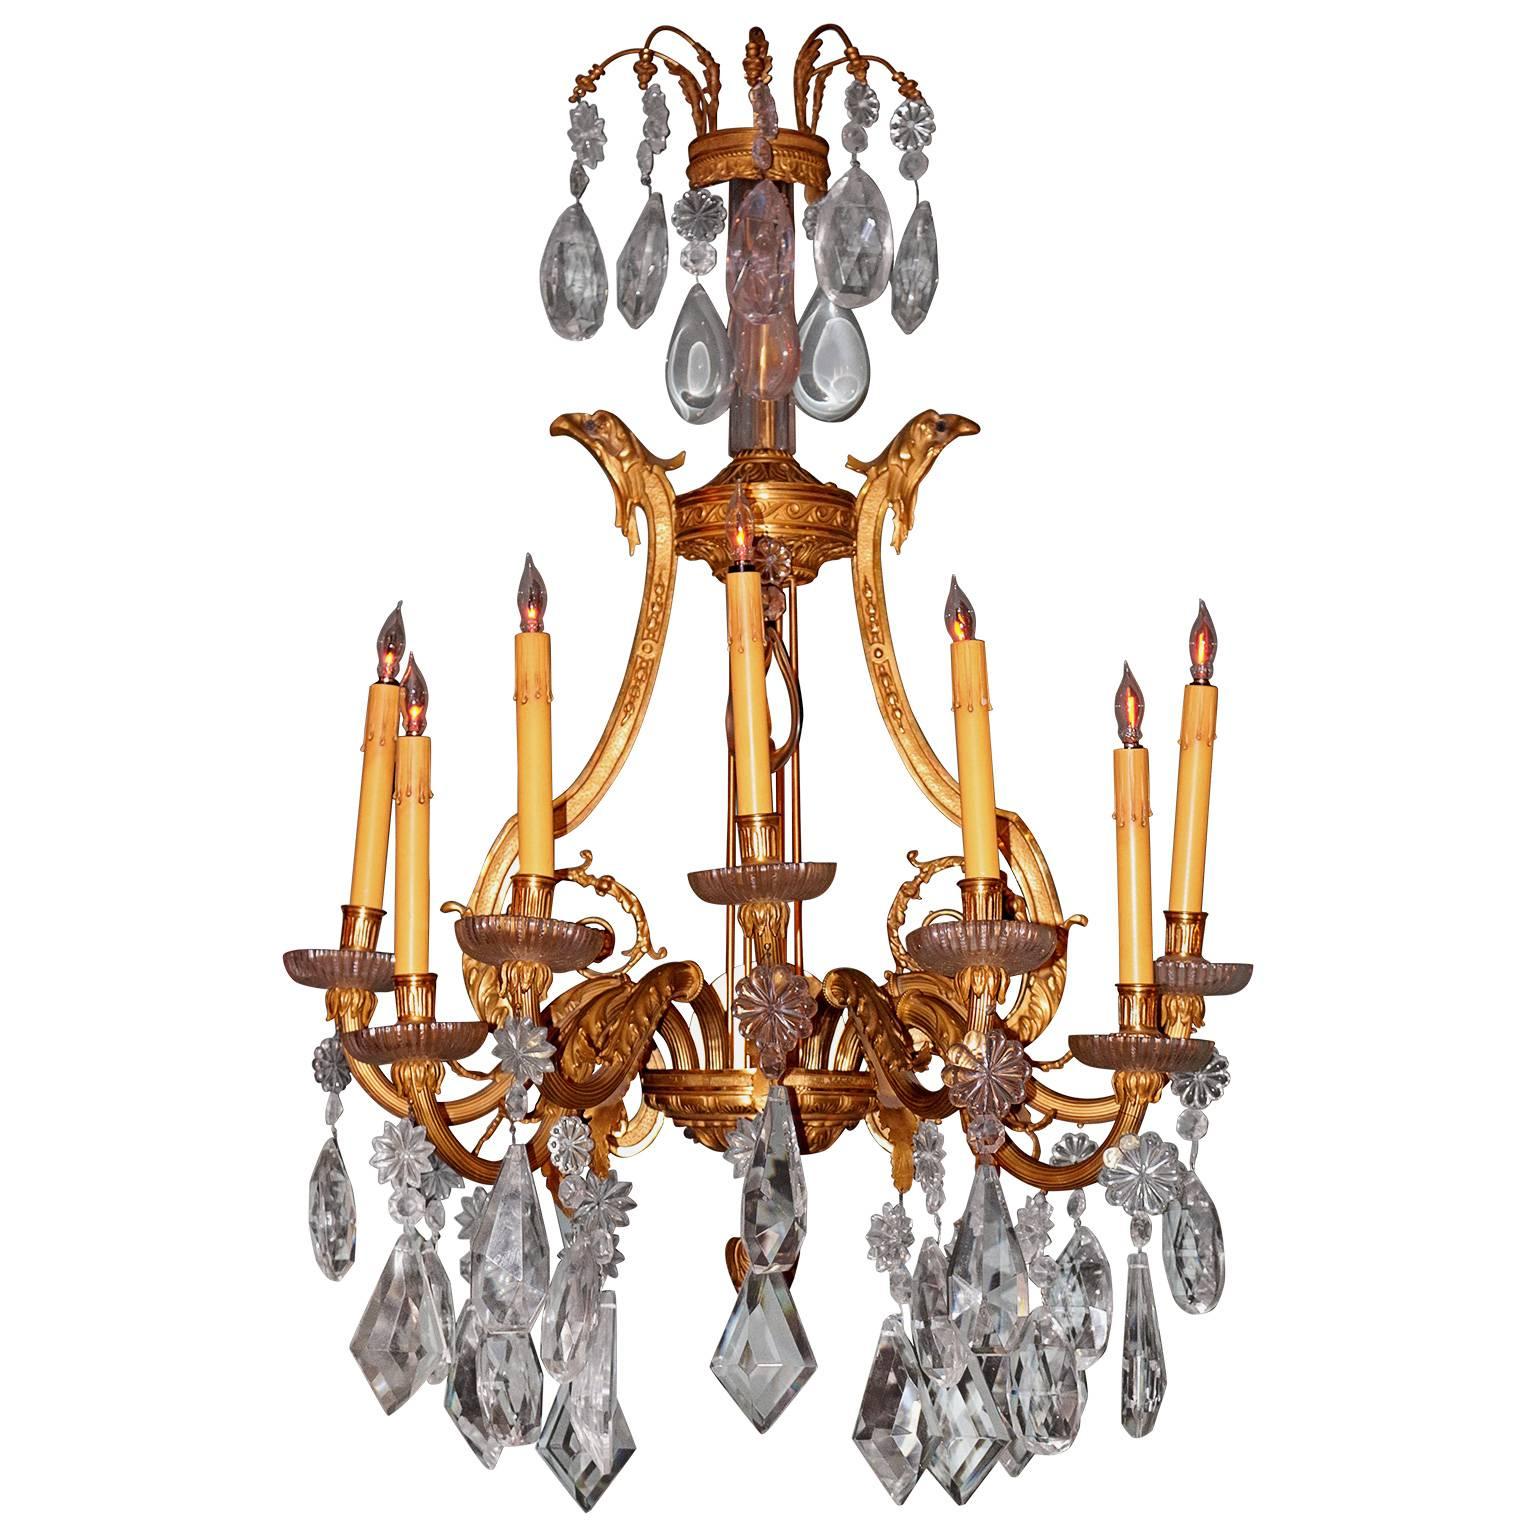 This pair of massive antique French sconce are in great used condition. The ormolu on the bronze combined with extra large cut crystal hanging from the lights makes them exquisite. All the arms are moveable to different directions.